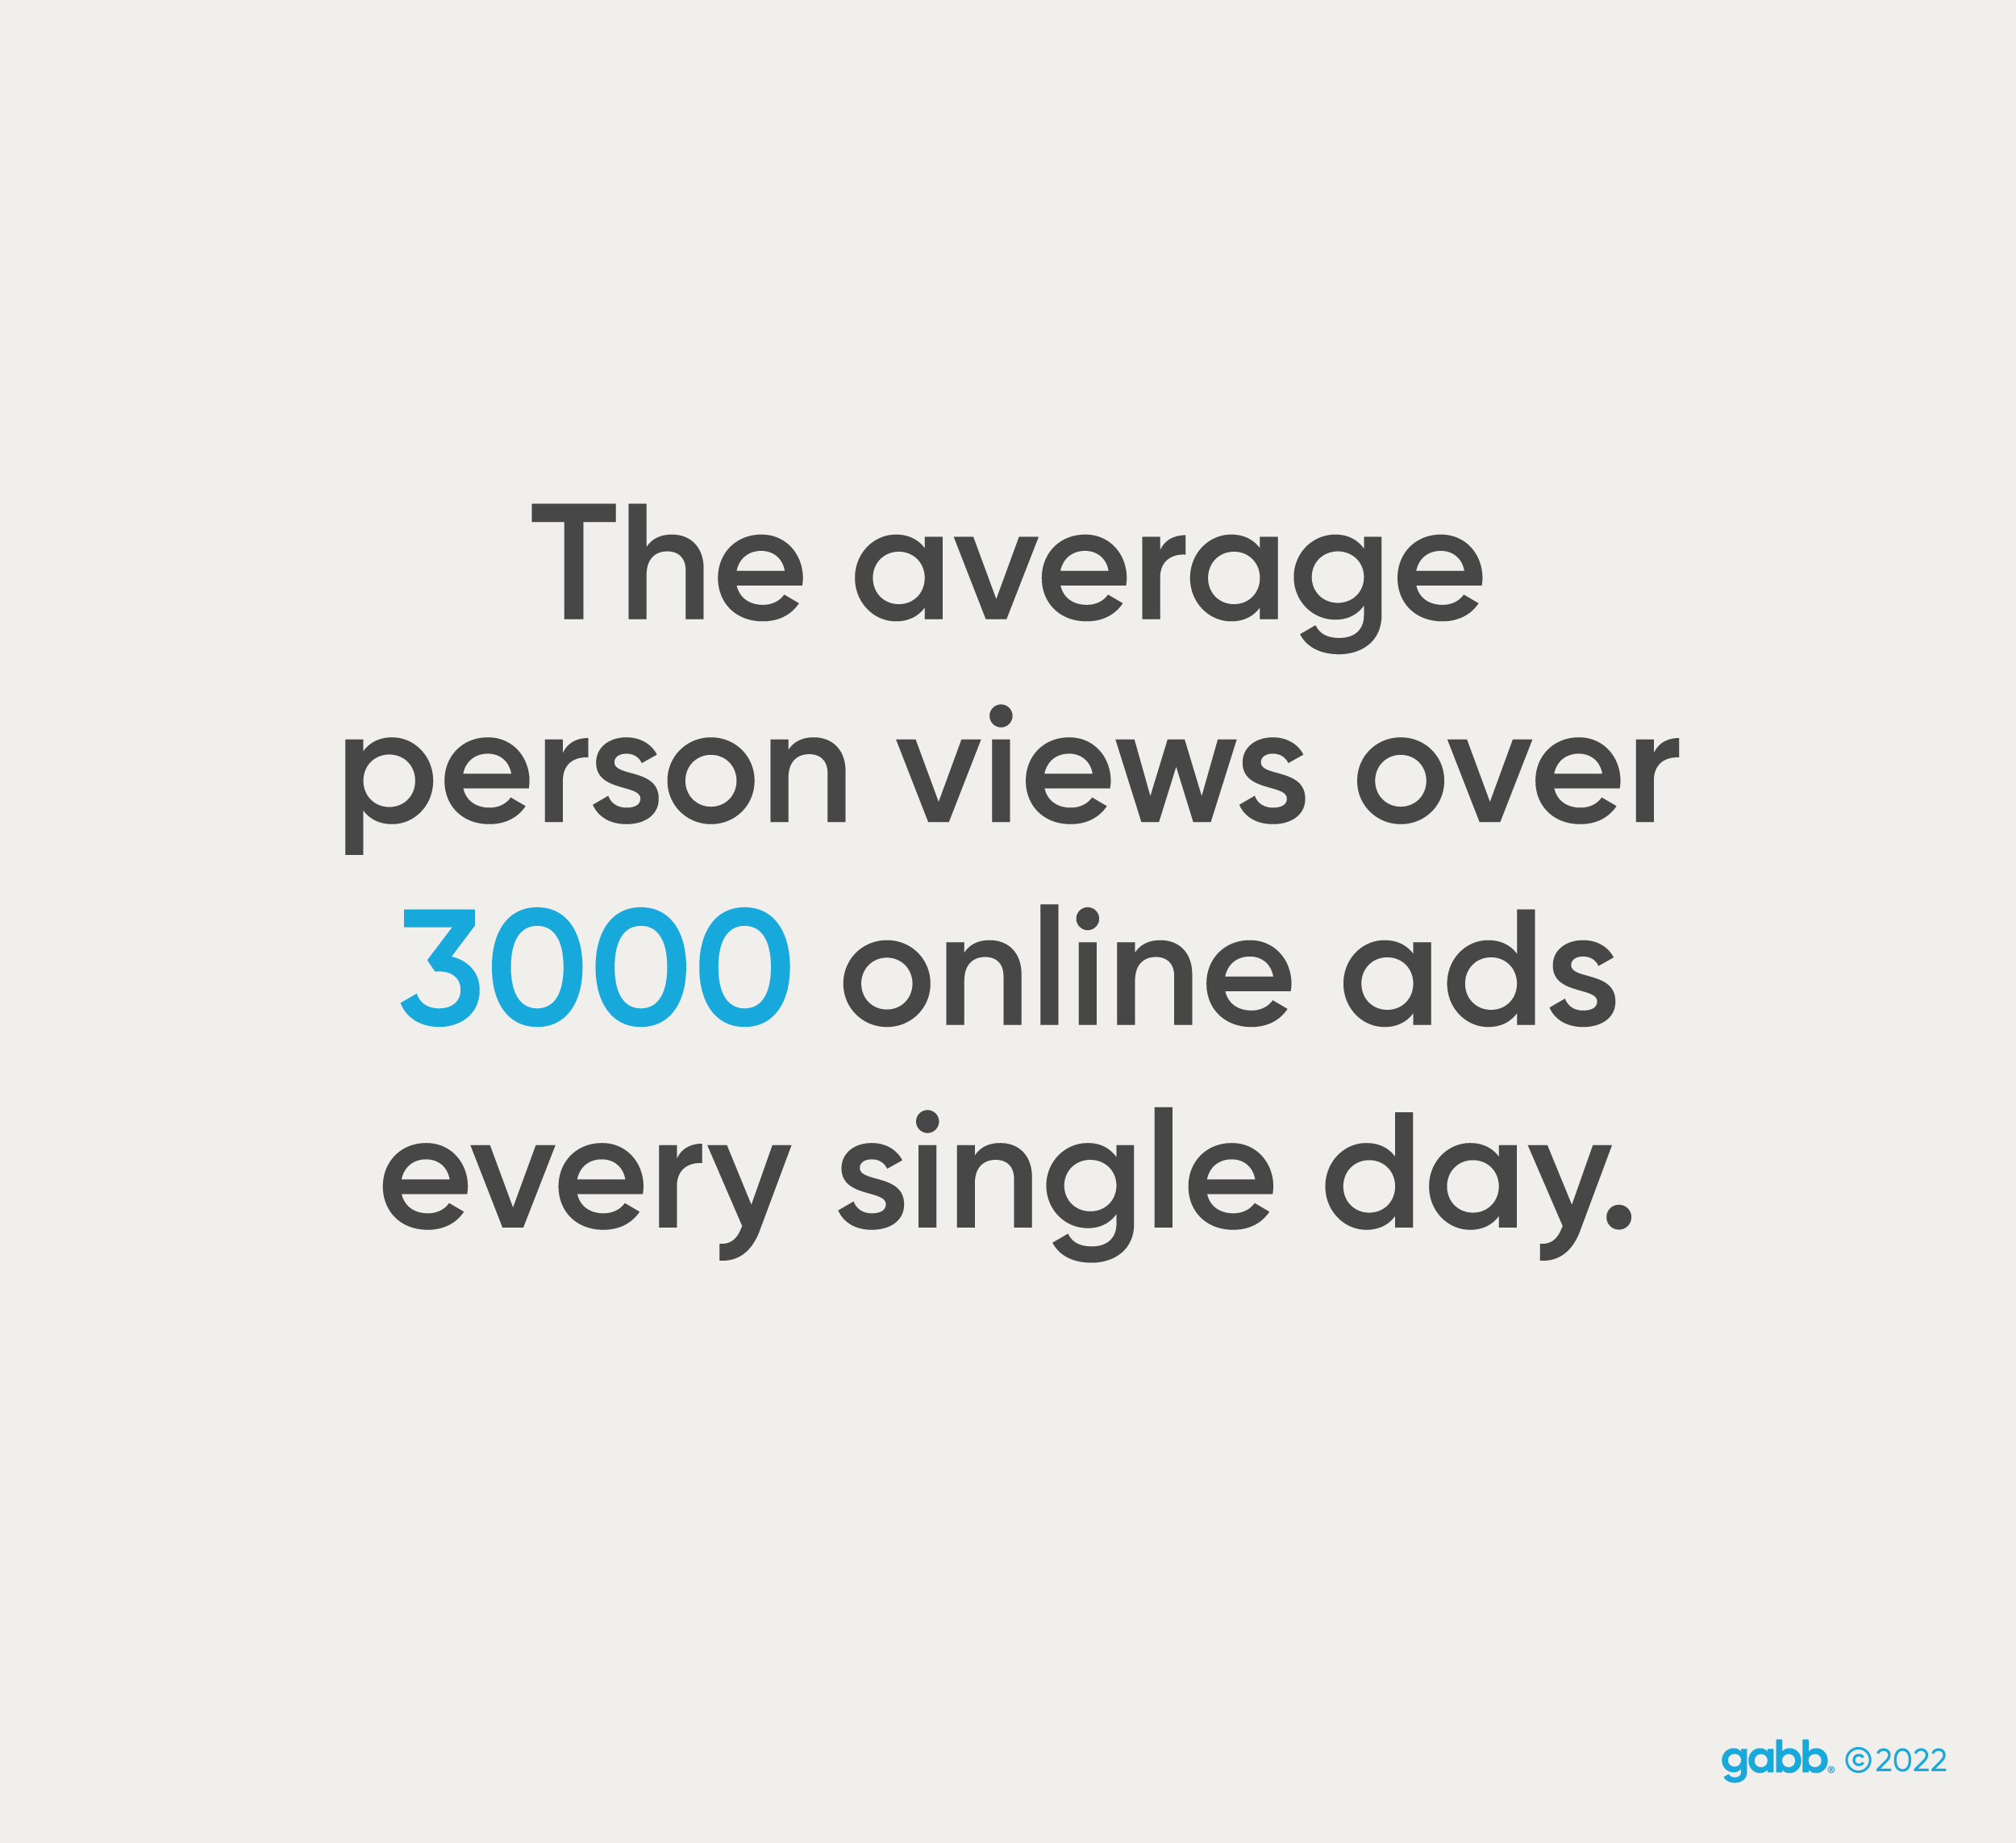 The average person views over 3000 online ads every single day.